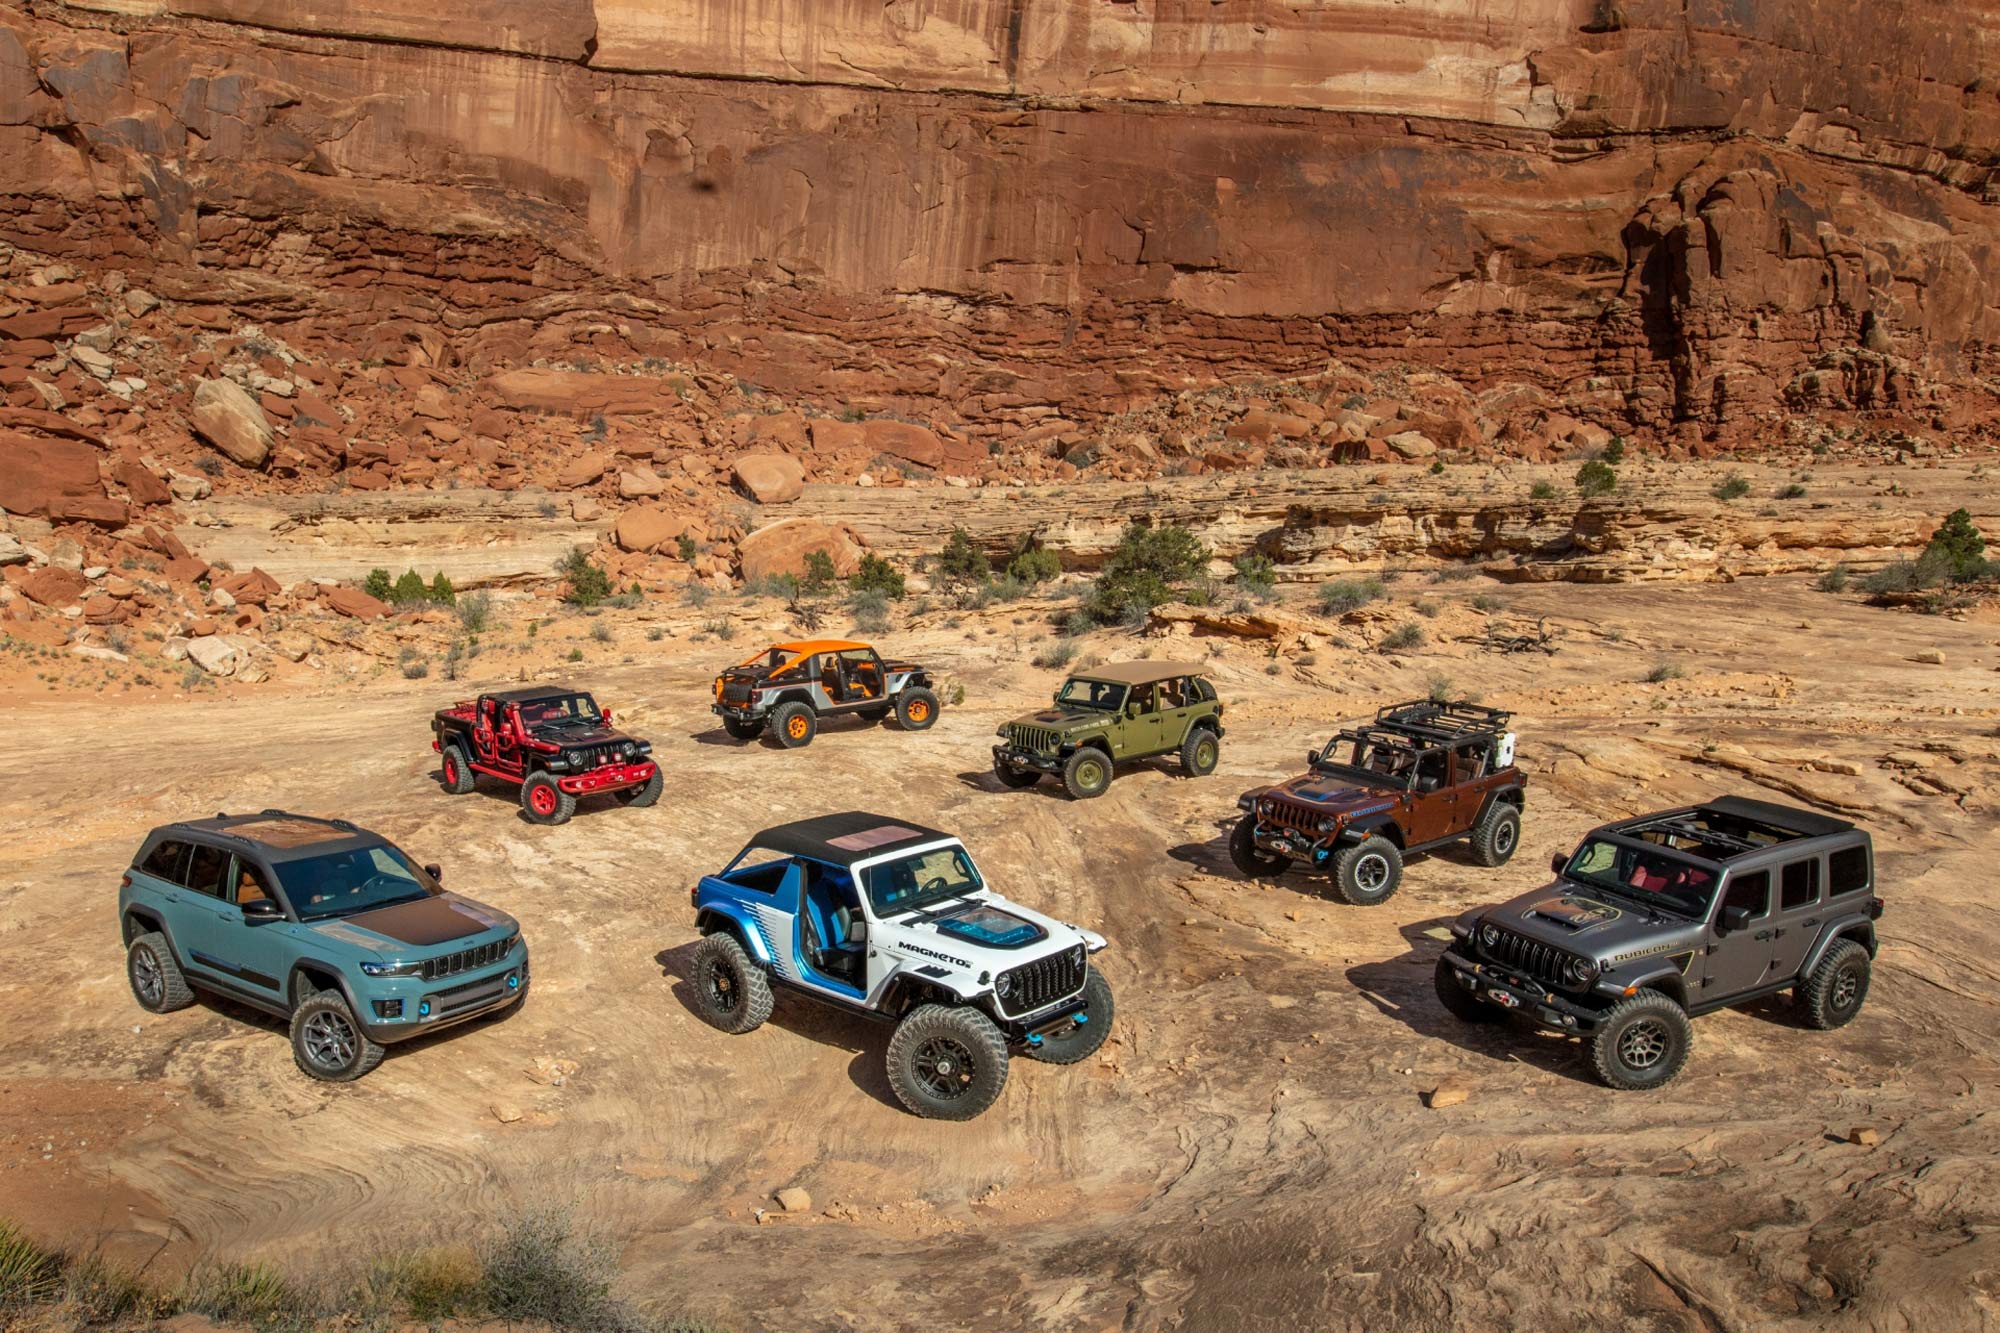 Jeep concept vehicles at the 2022 Easter Jeep Safari in Moab, Utah